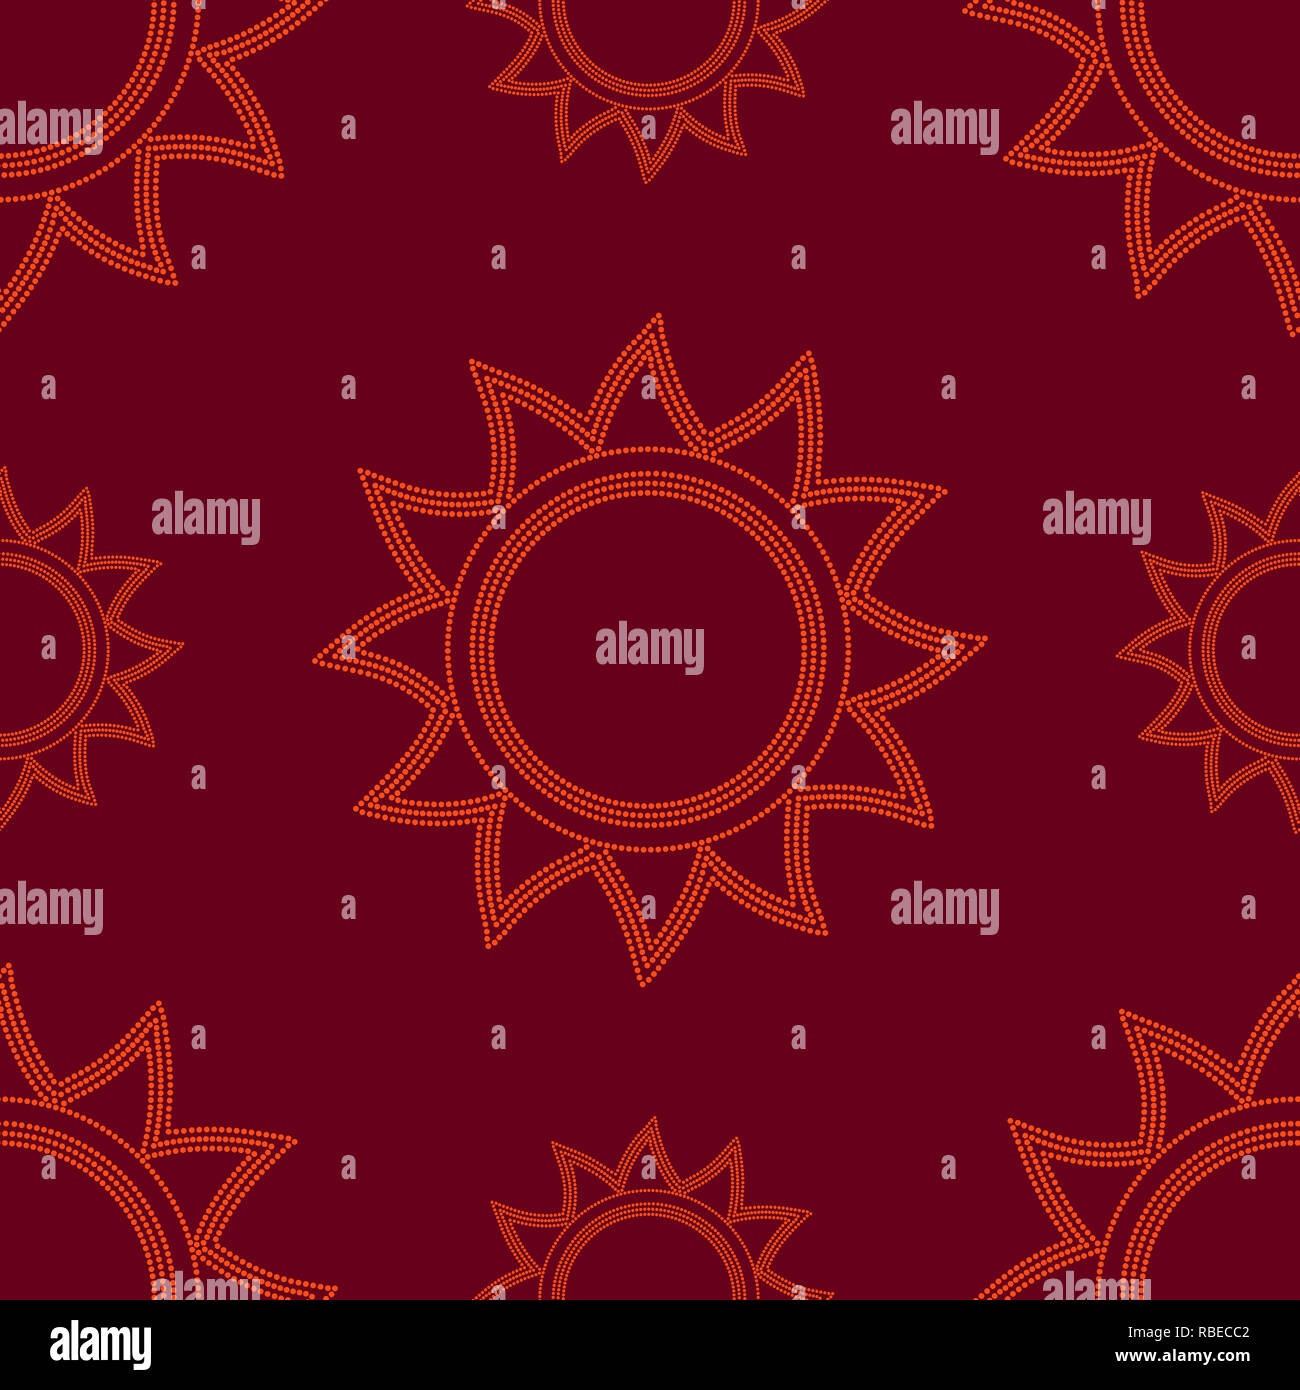 Seamless dotted sun pattern on red background Stock Photo